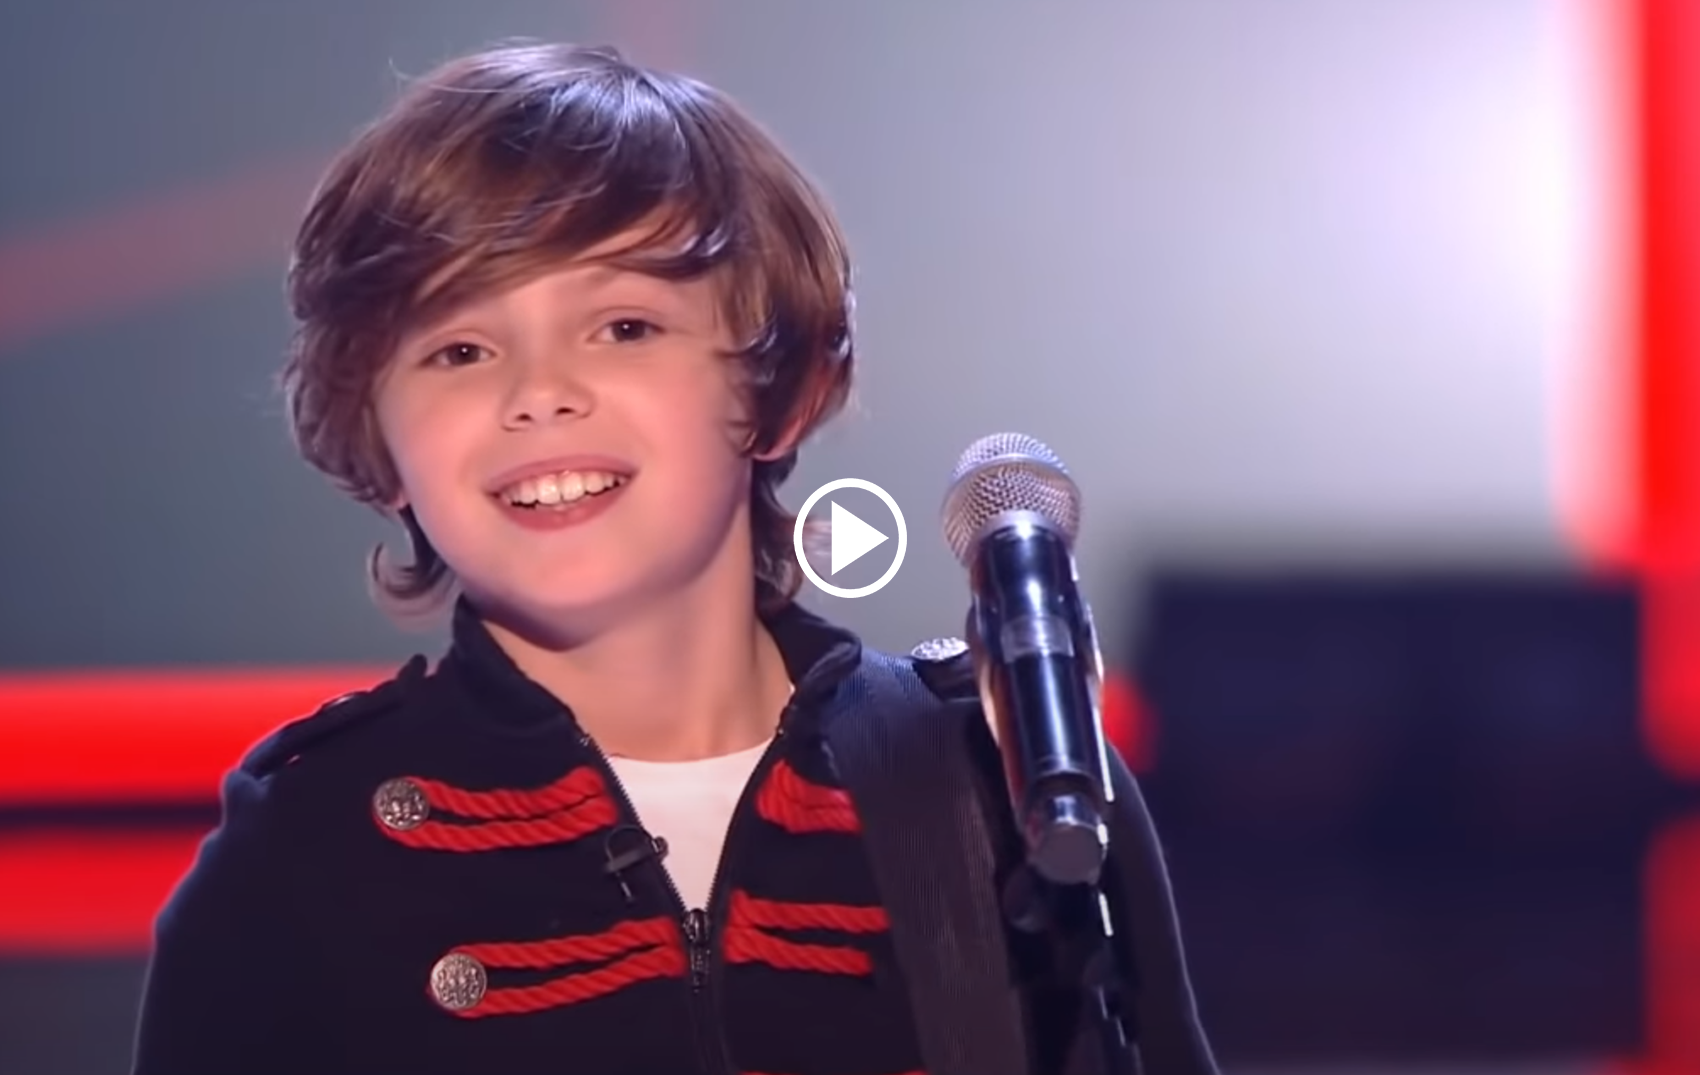 Jack performs 'Just The Way You Are' Semi Final The Voice Kids UK